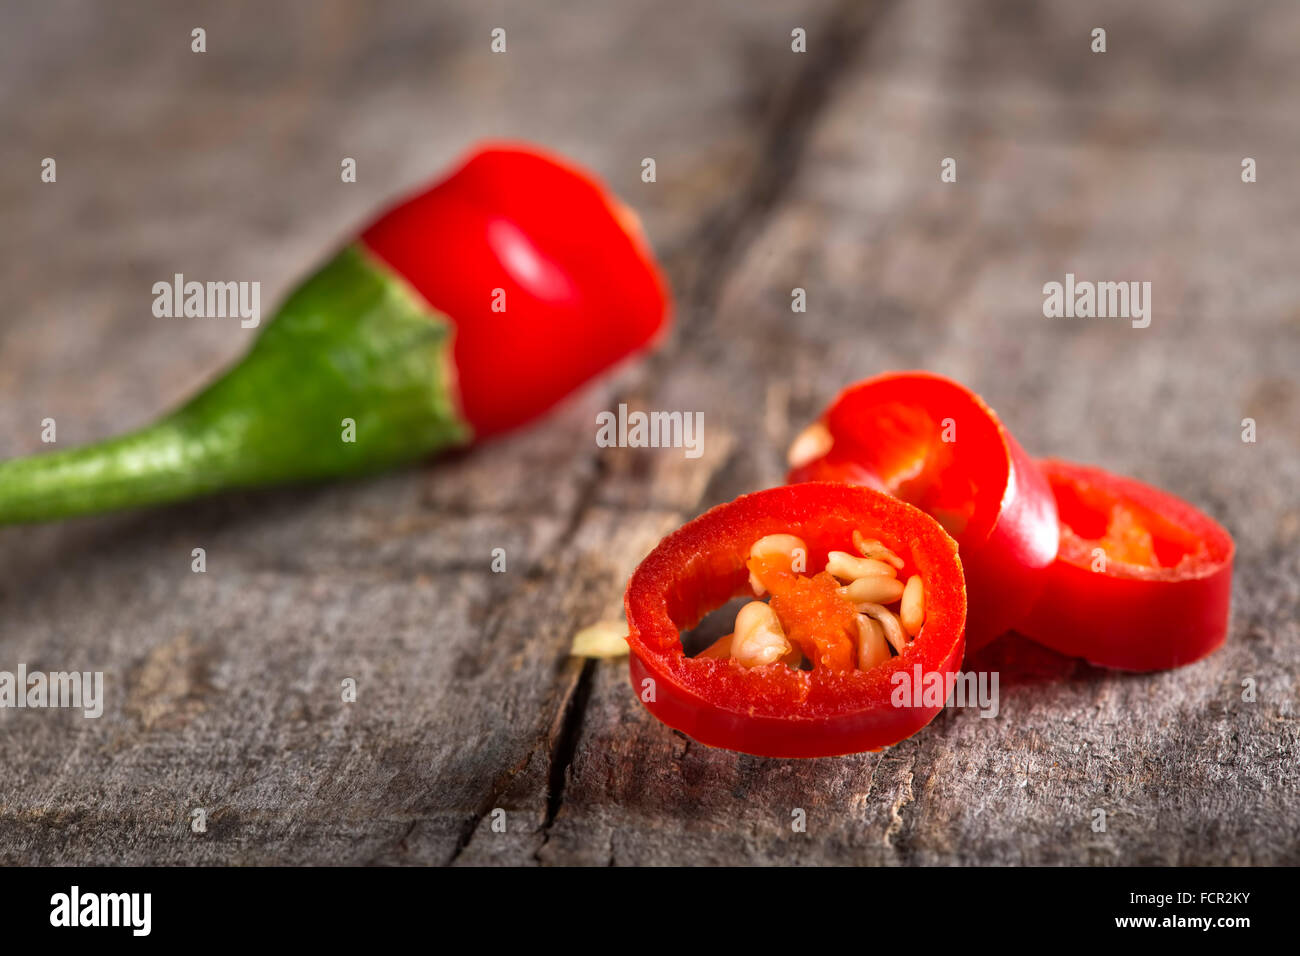 Red chili peppers slices over wooden background Stock Photo